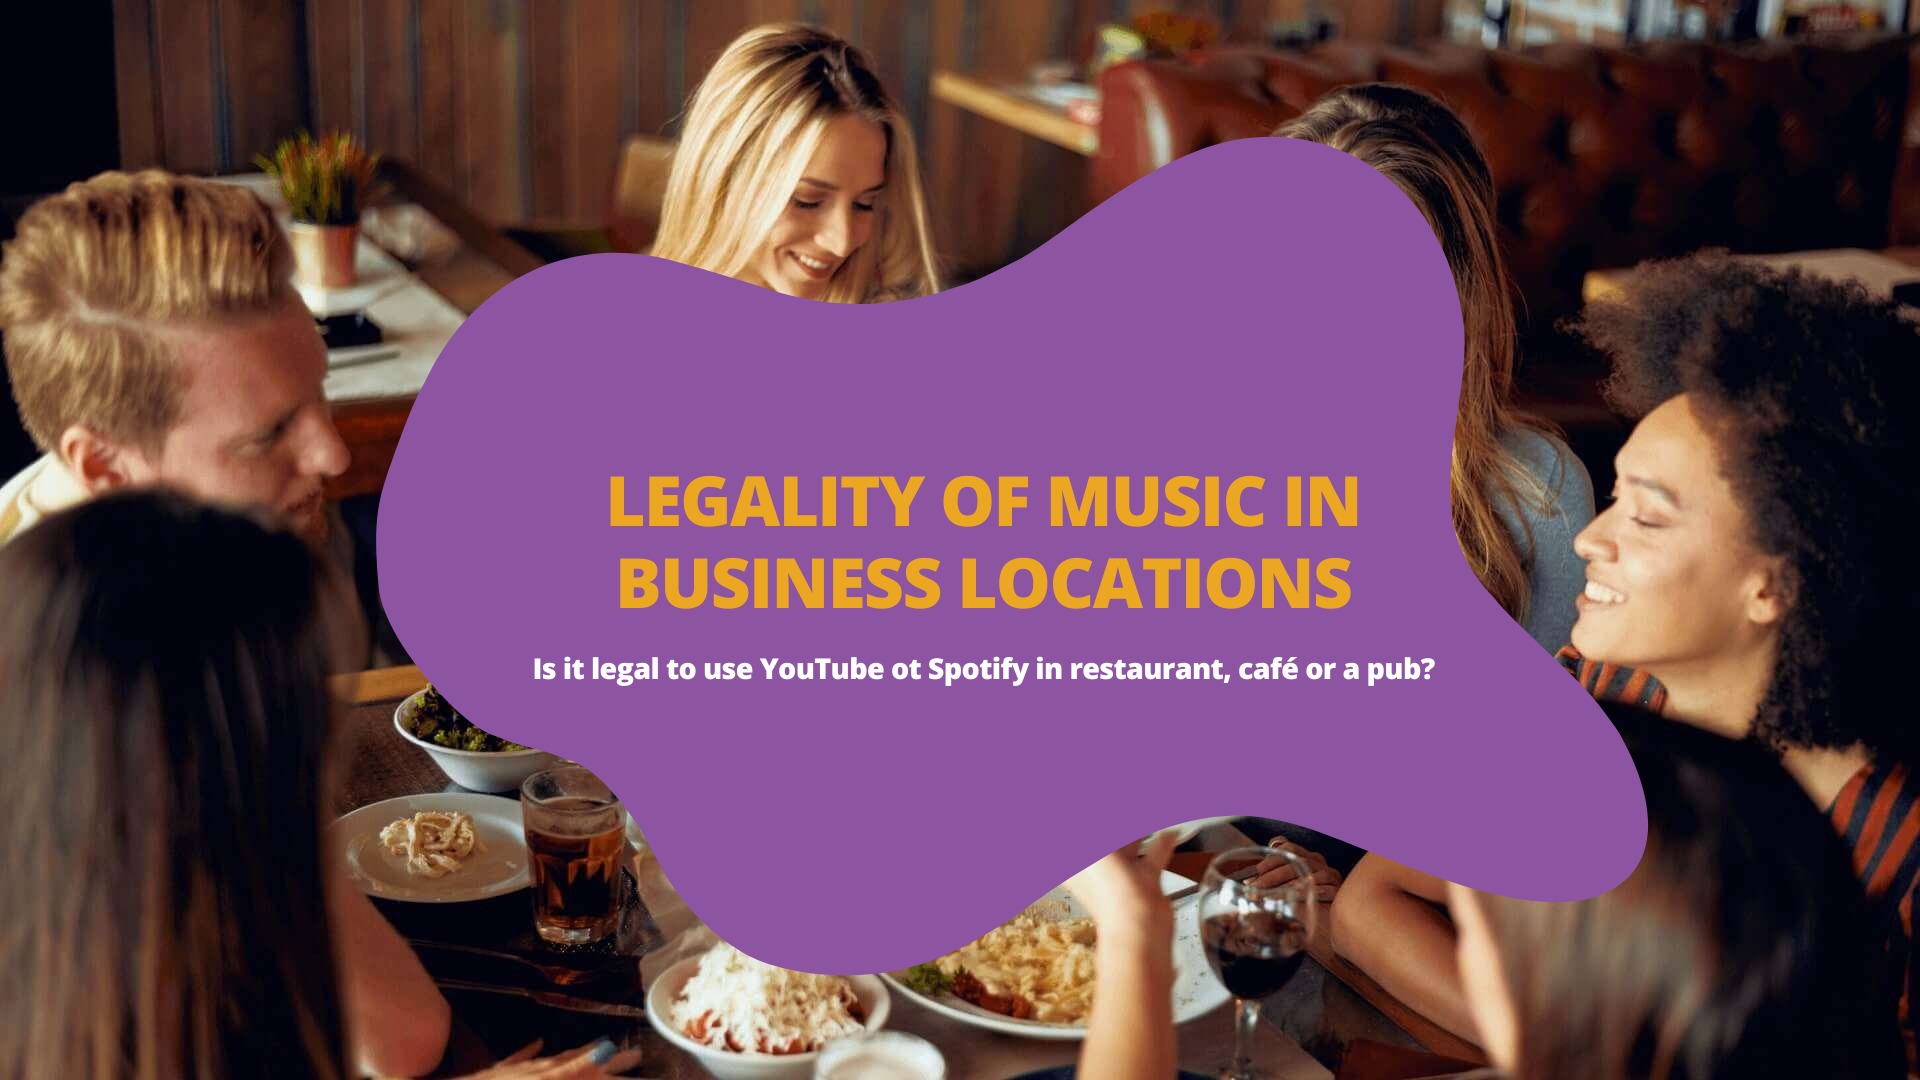 Is it legal to use YouTube ot Spotify in restaurant, café or a pub?